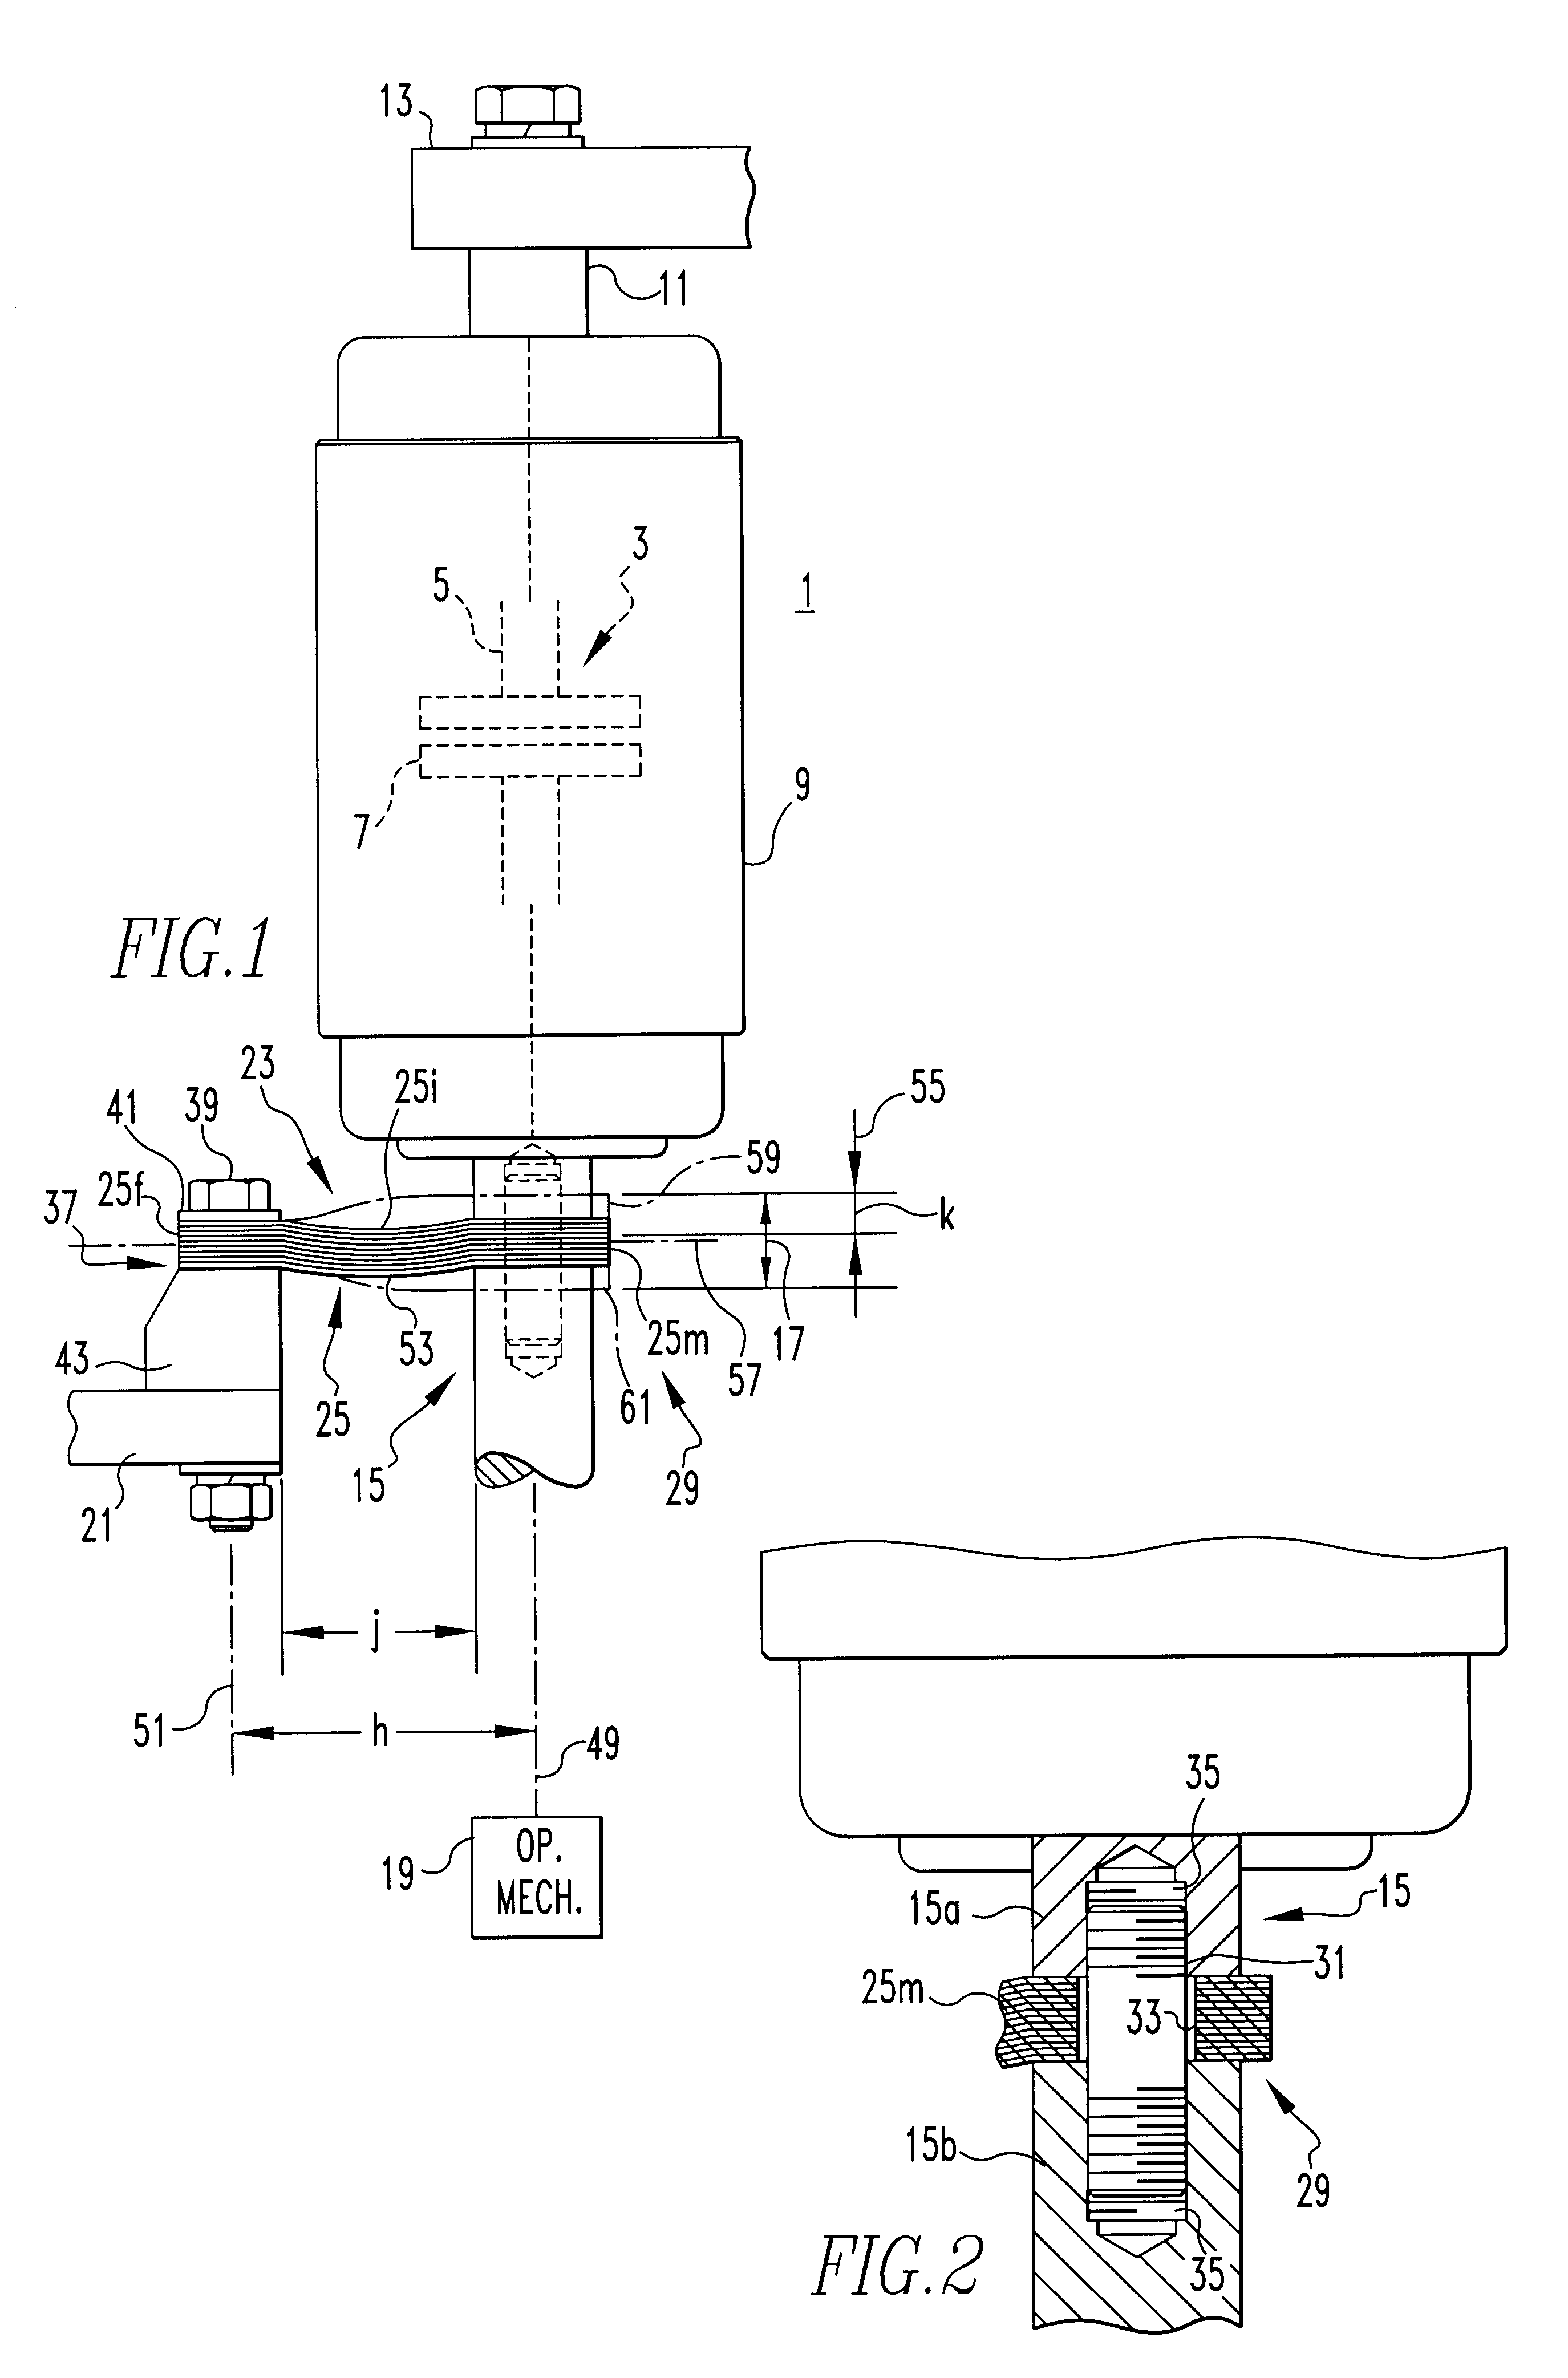 Vacuum switch operating mechanism including laminated flexible shunt connector